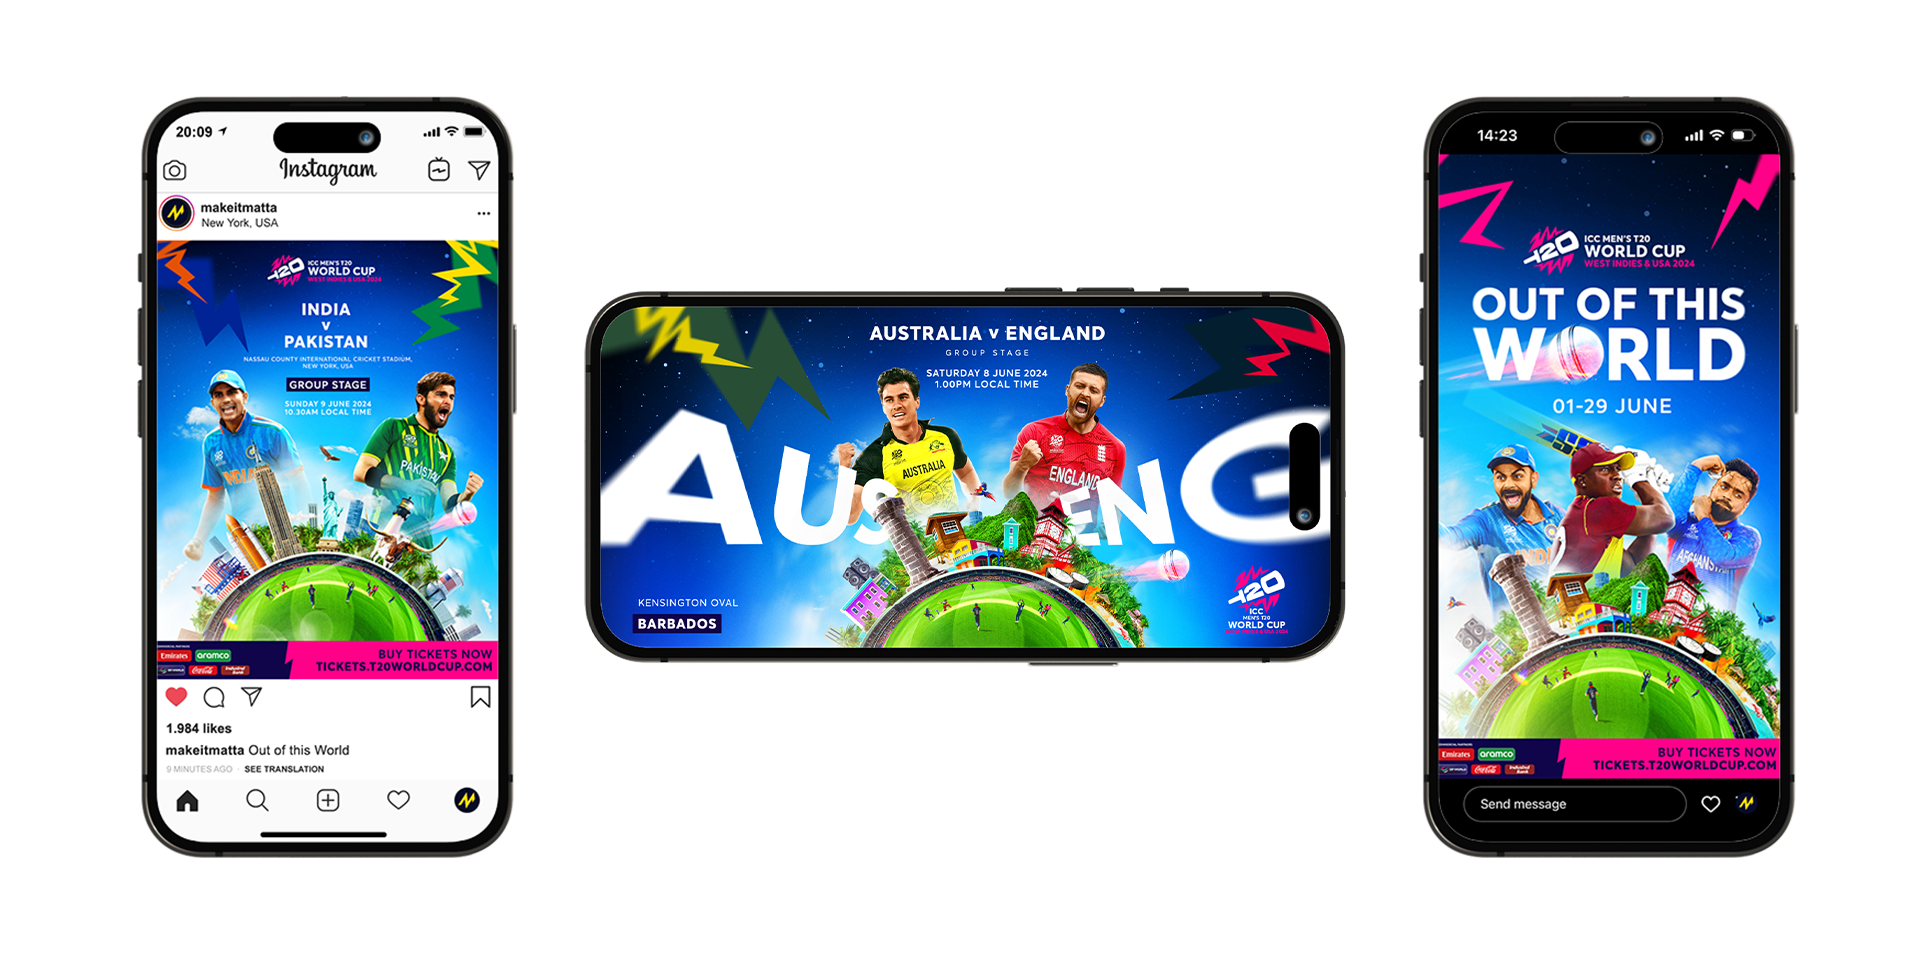 3 phone mock ups showing the ICC Out Of This World campaign executed across social and phone formats